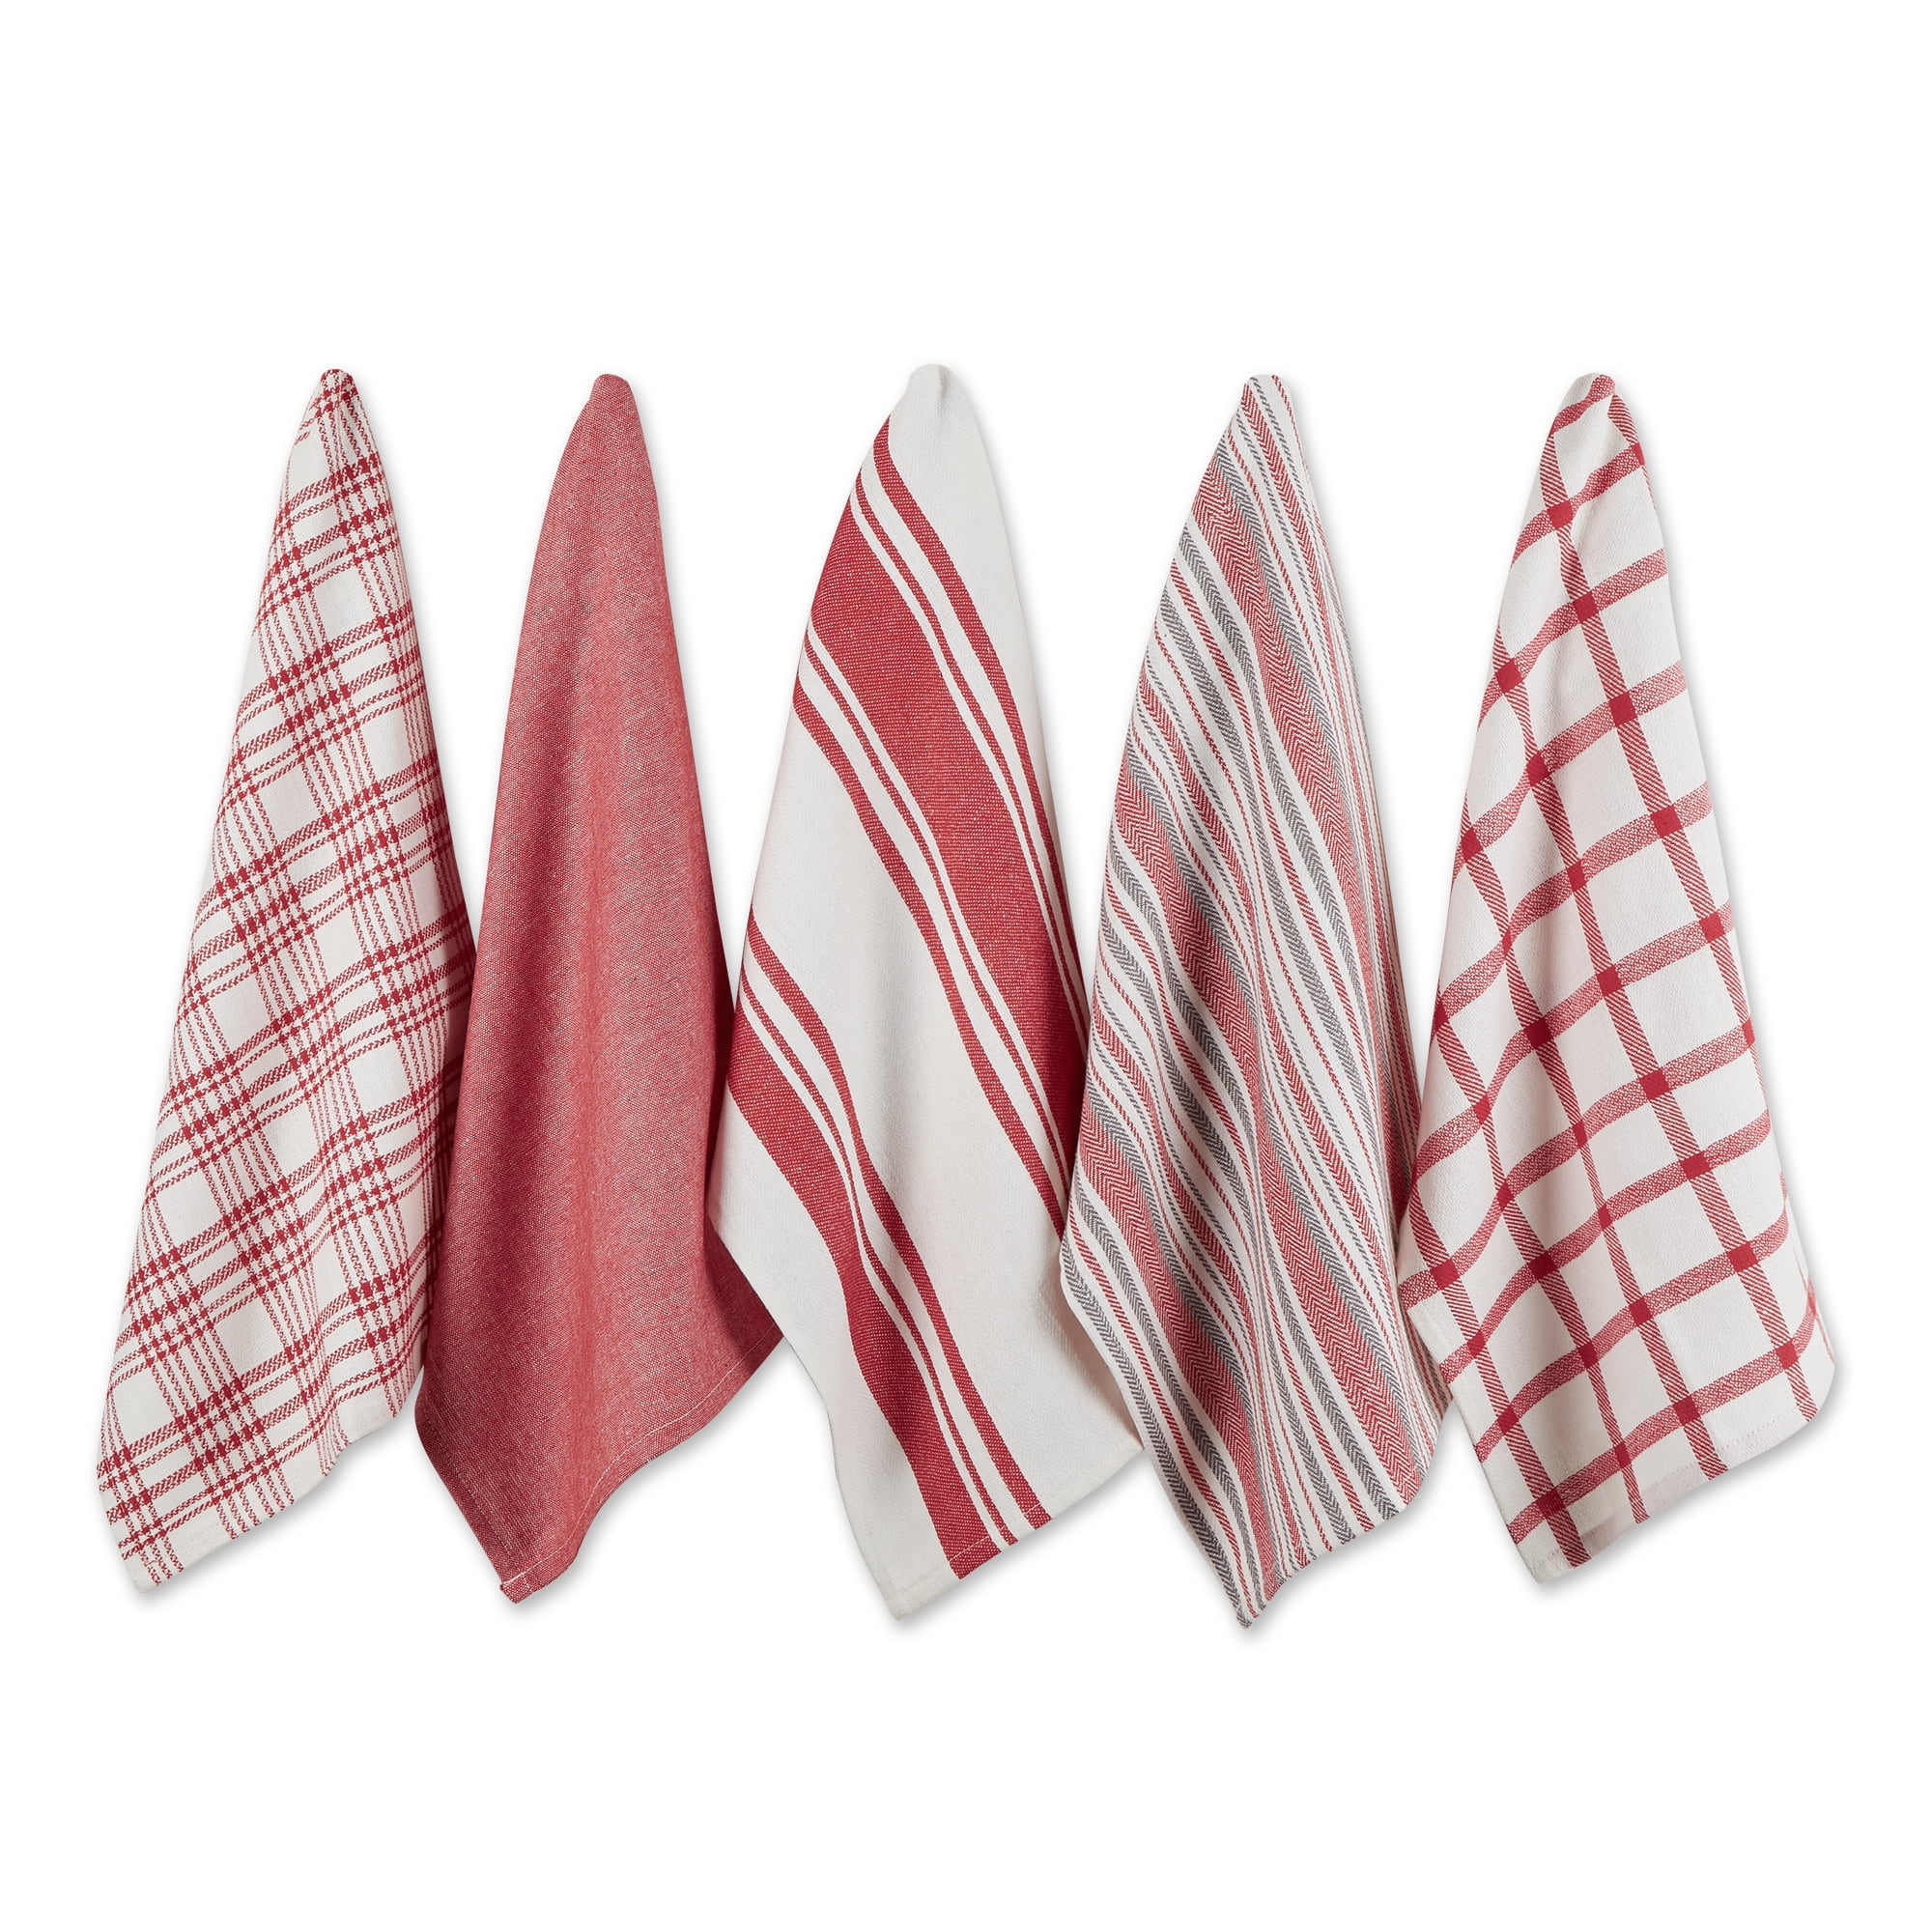 Details about   DII Red Waffle Weave Dishtowel Set of 6 